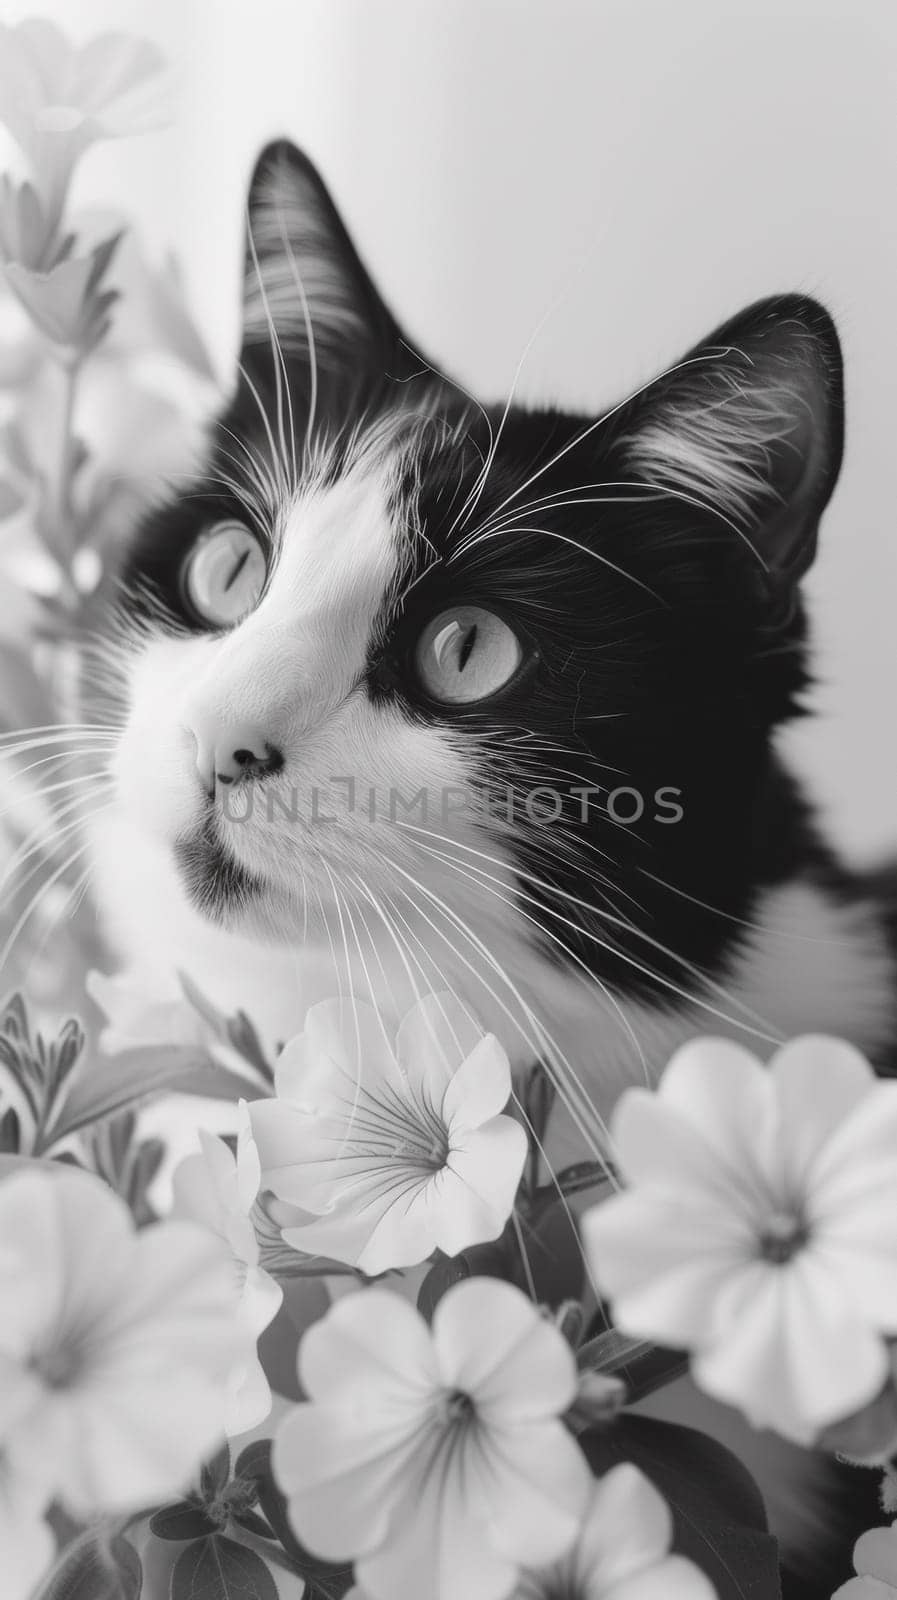 A black and white cat sitting in a bunch of flowers, AI by starush